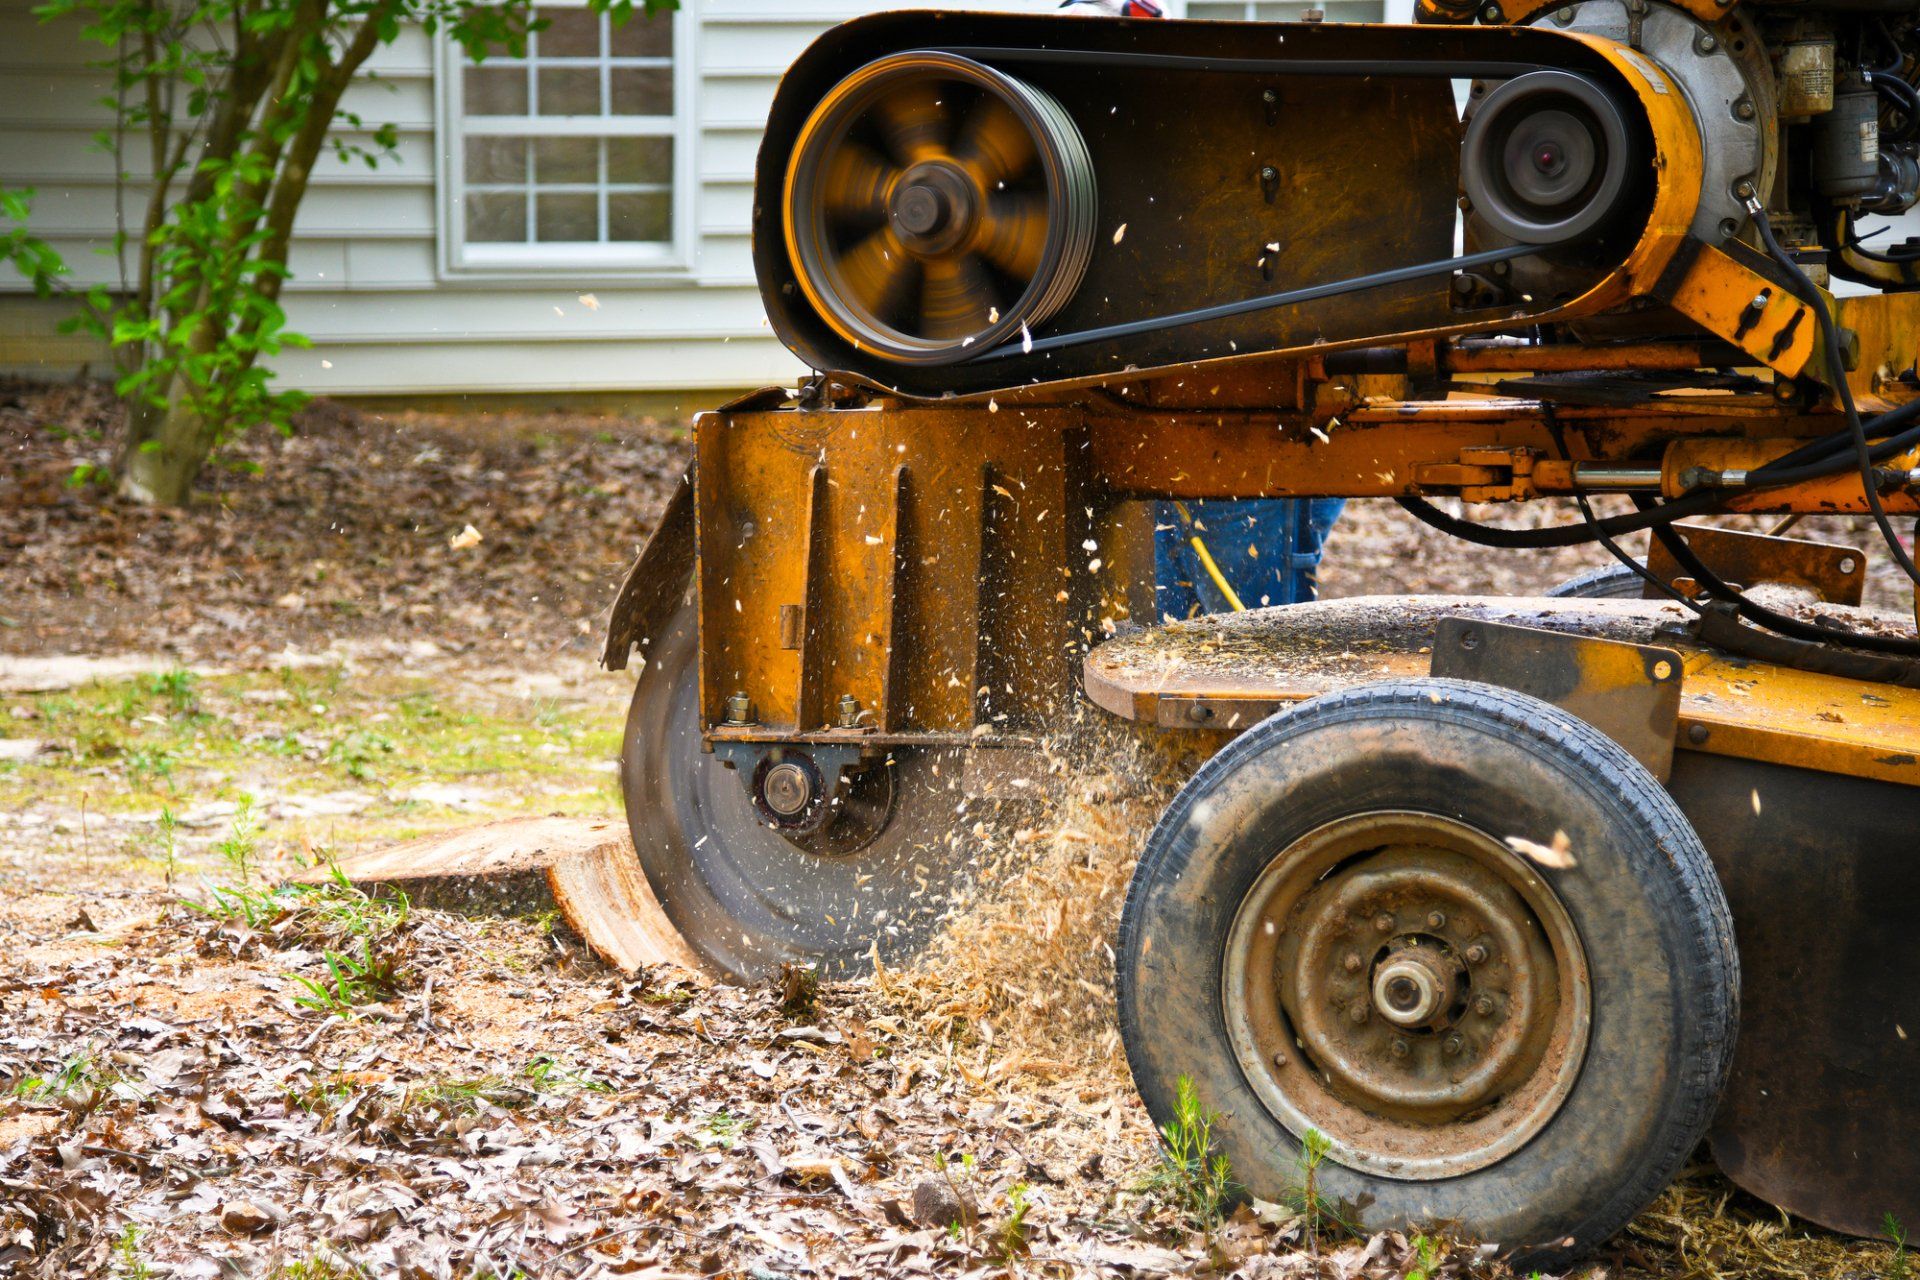 Real Tree Team's specialized stump grinding machine is used to grind used in removing unsightly tree stumps in Pompano Beach FL